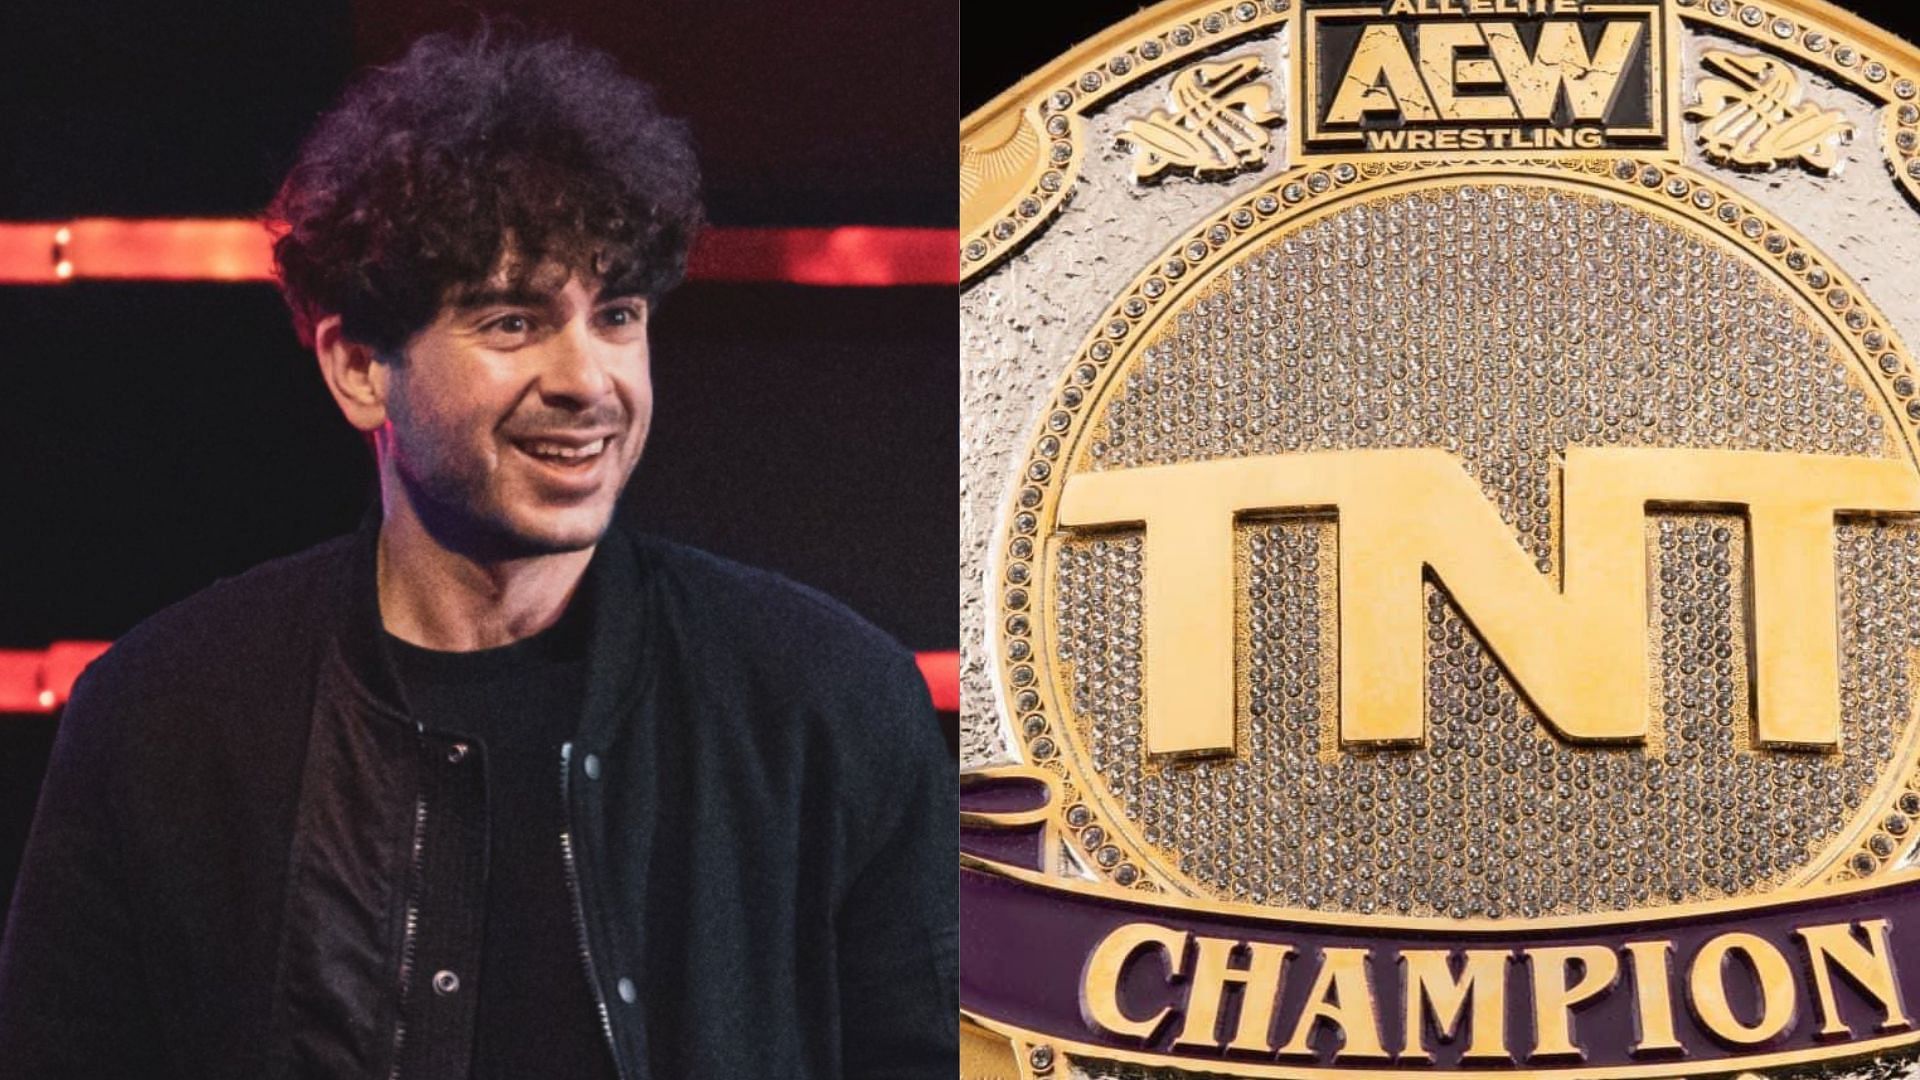 Tony Khan is excited to see a former champion back in AEW